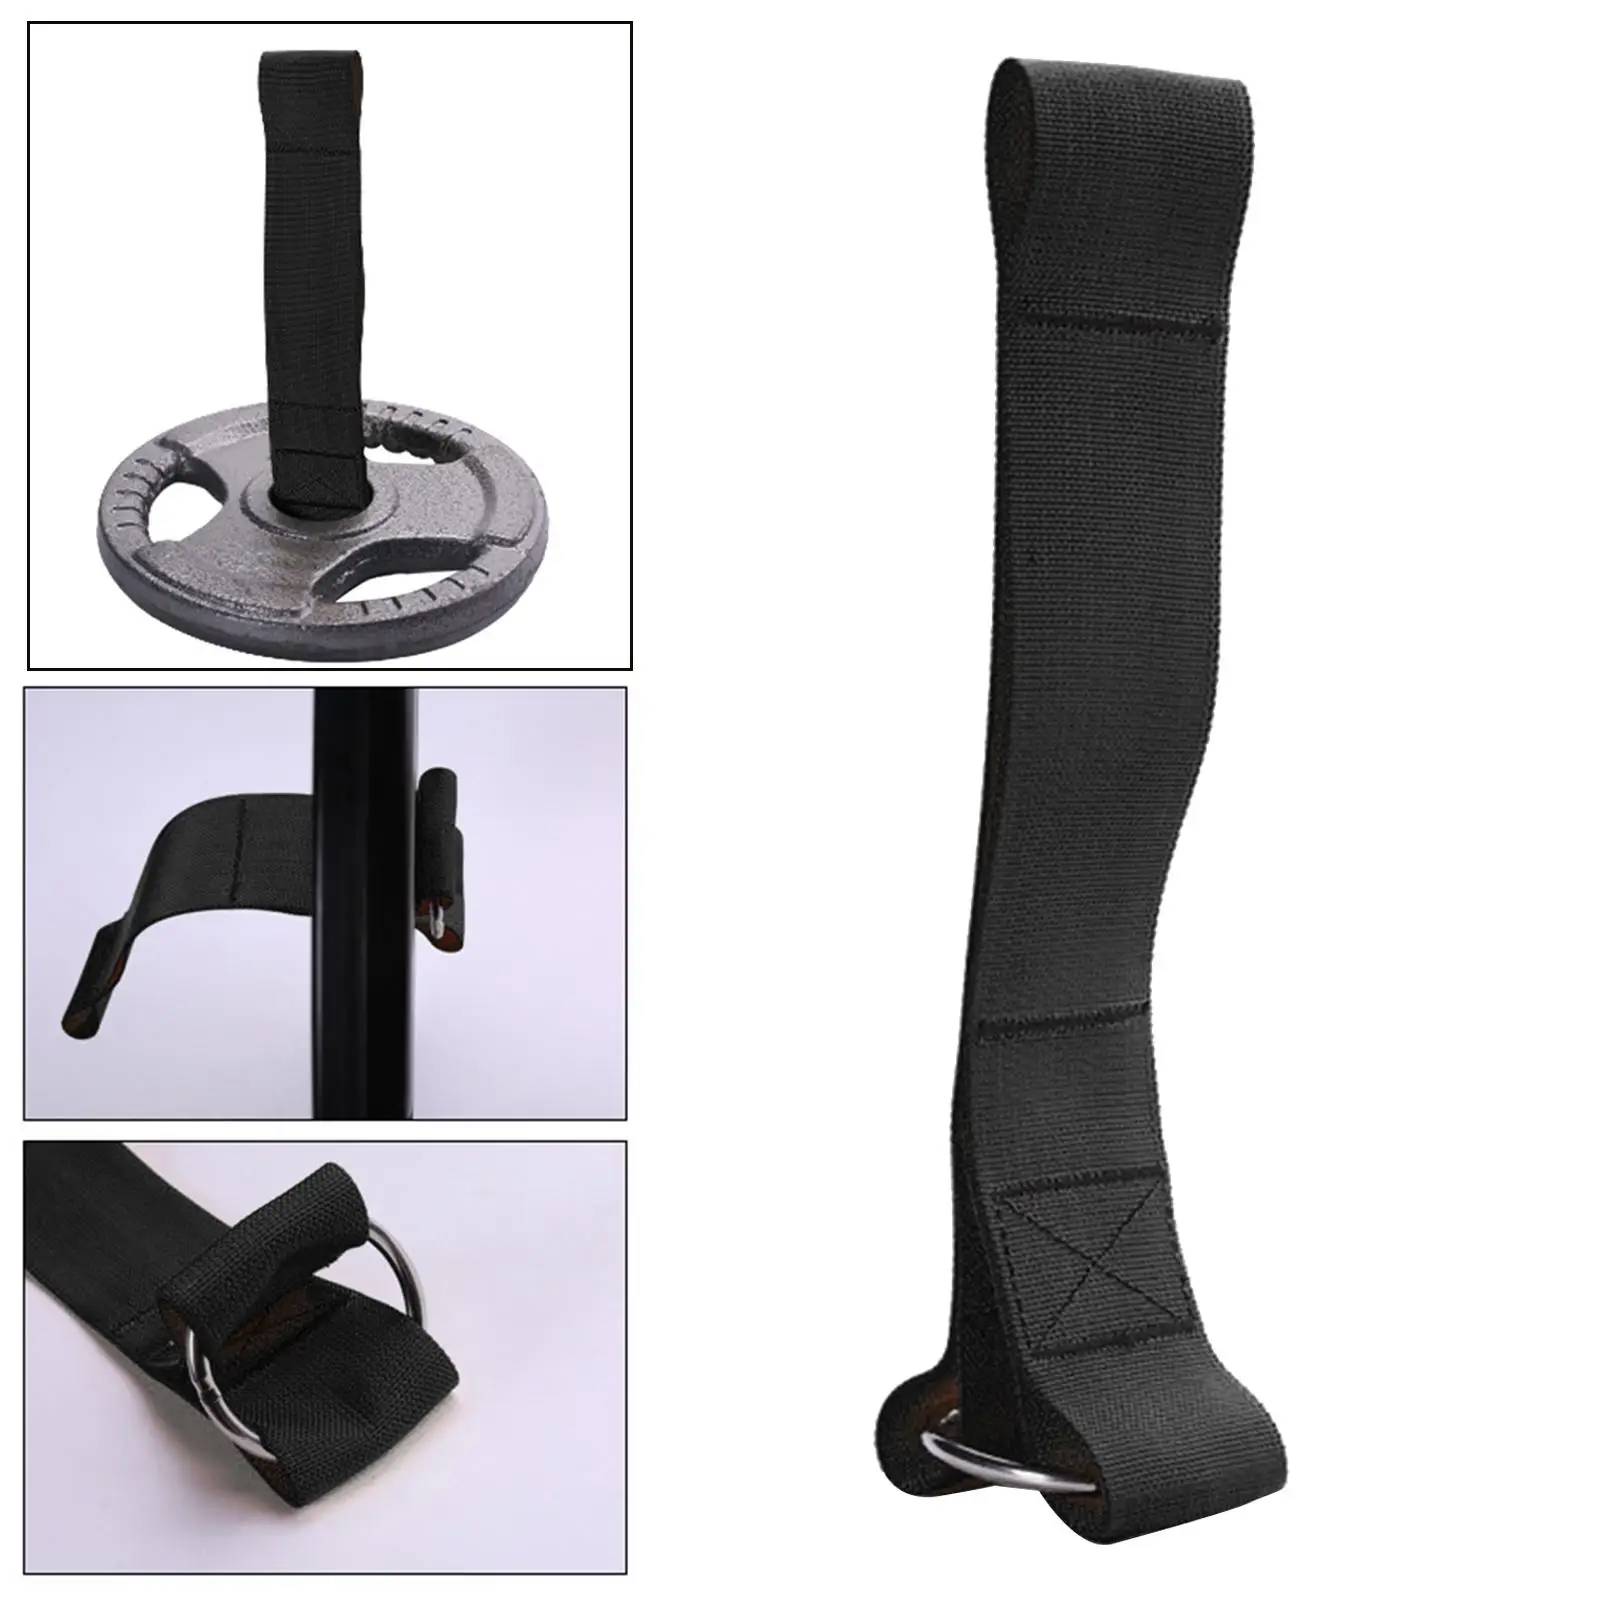 Durable Strap Loading Pin Attachment Portable for Weight Training Fitness